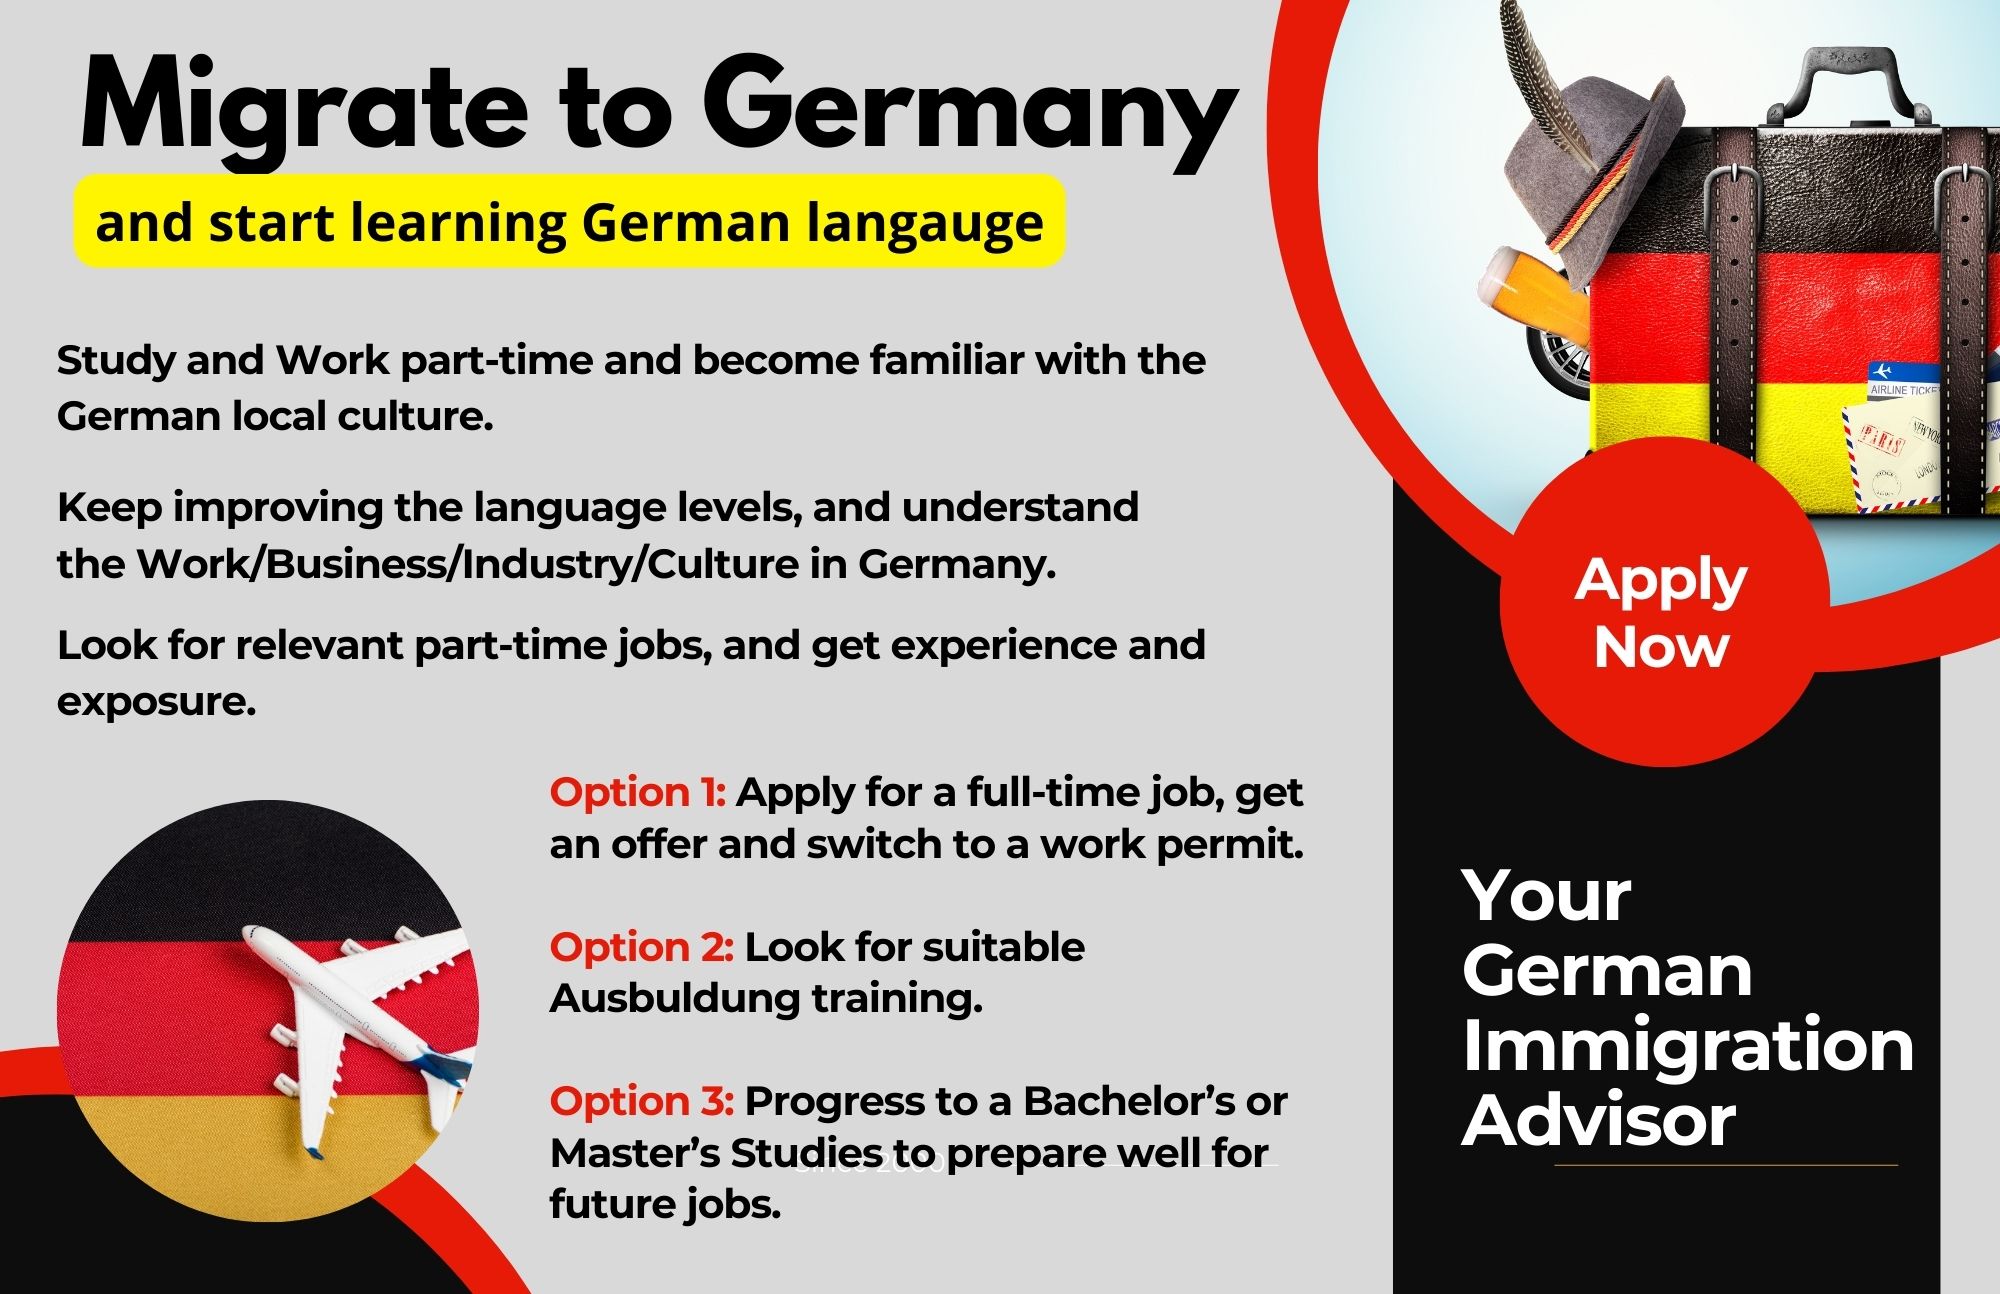 Migrate to Germany - Jobs in Germany - KCR CONSULTANTS